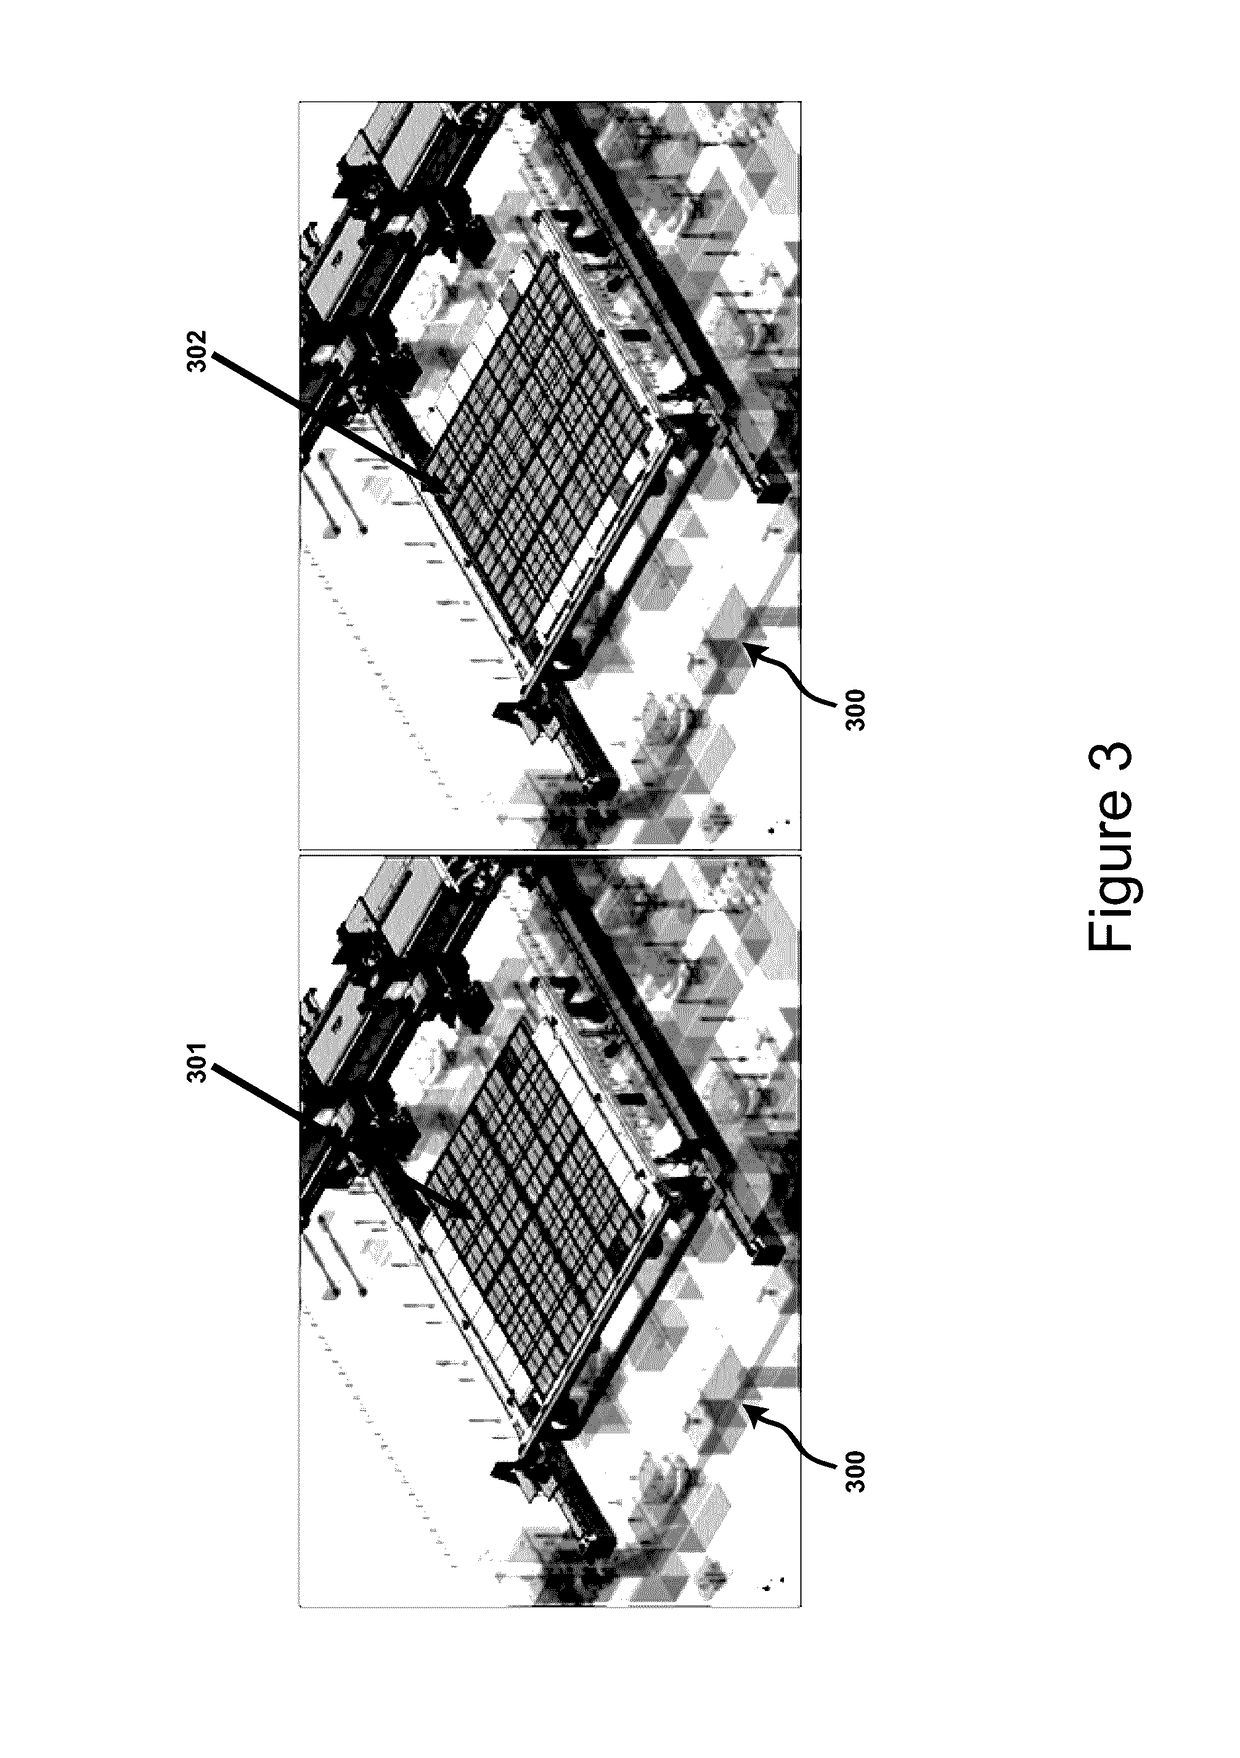 Systems and methods for electrical inspection of flat panel displays using cell contact probing pads